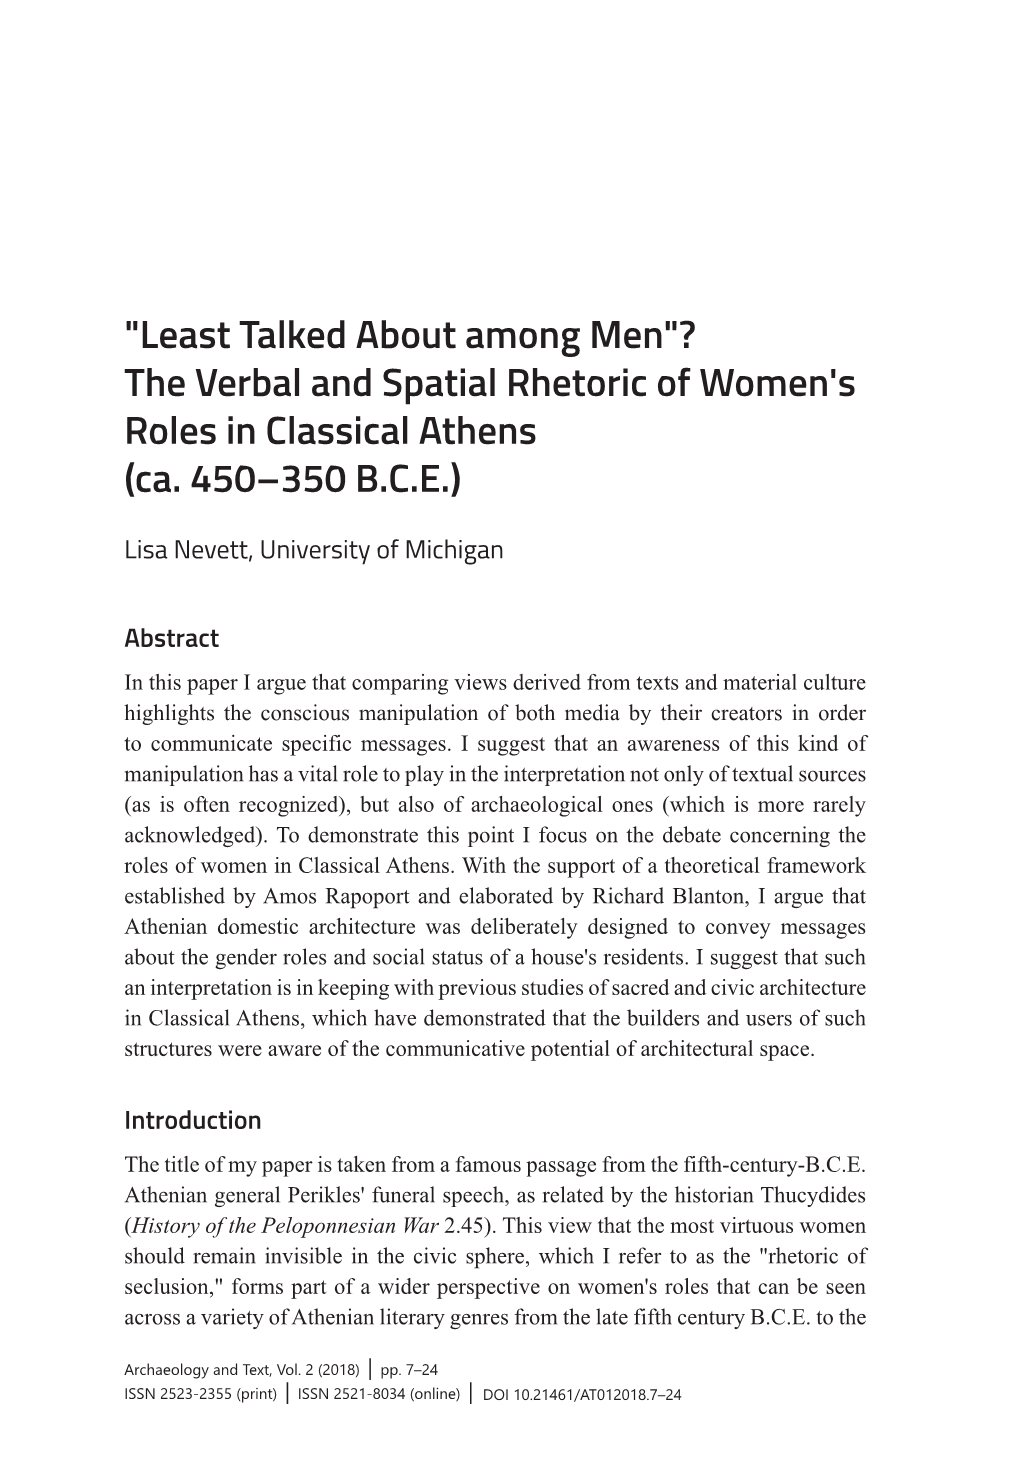 The Verbal and Spatial Rhetoric of Women's Roles in Classical Athens (Ca